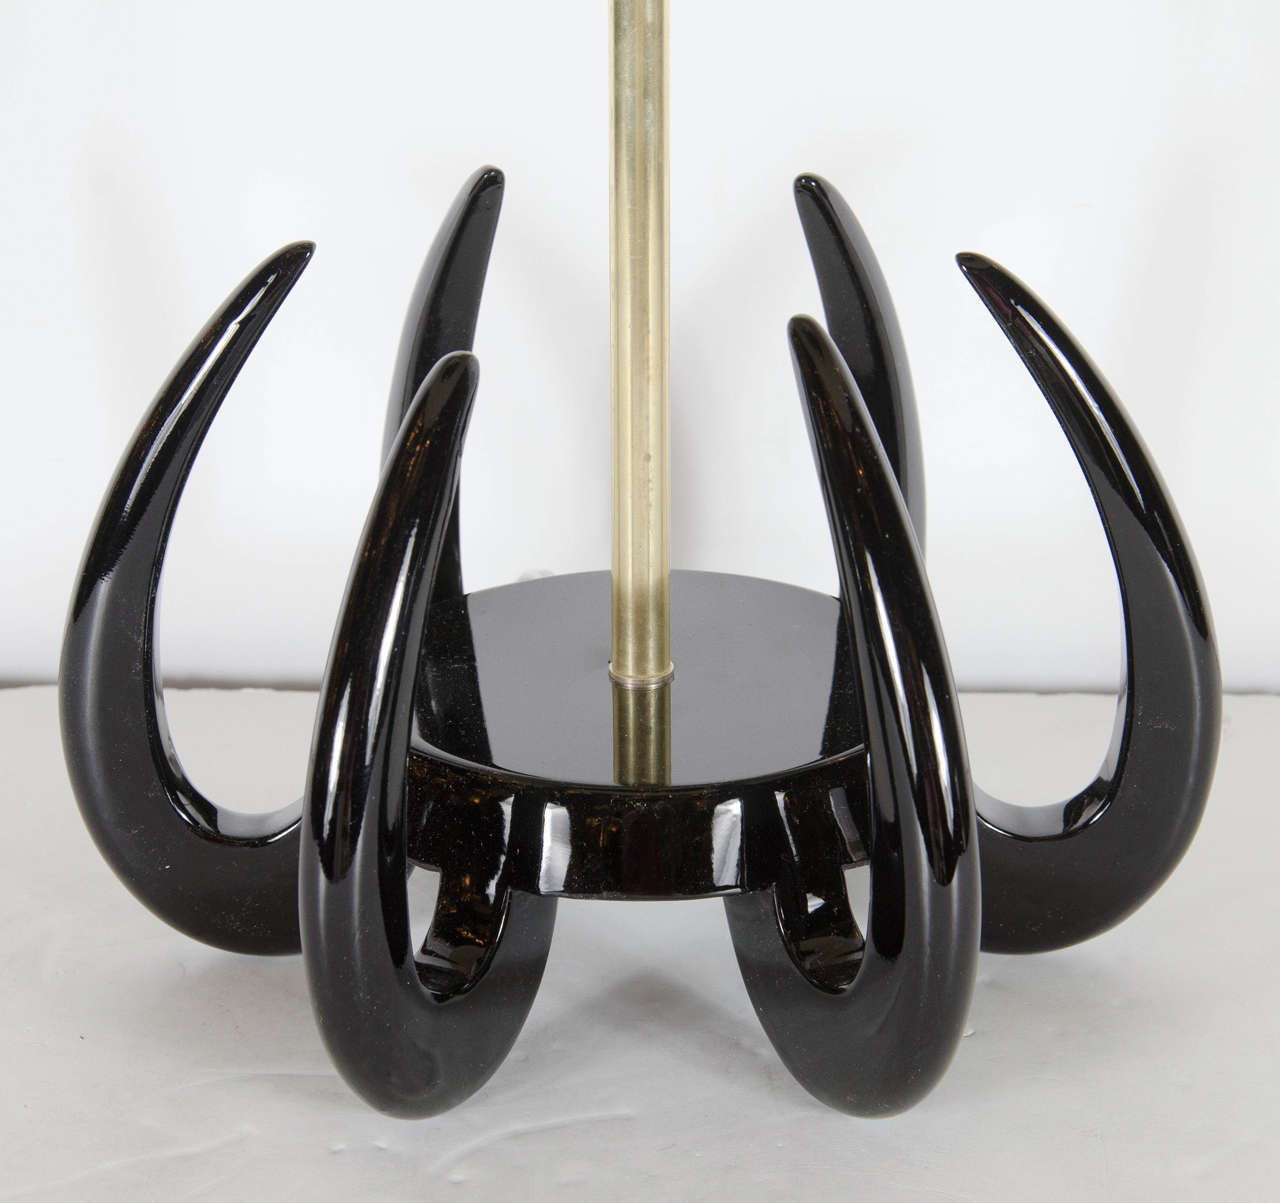 With their refined materials and clean lines, this elegant pair of Mid-Century Modernist sculptural table lamps represents exceptional examples of Mid-Century design. They feature an ebonized walnut saber base consisting of six curved arm extending